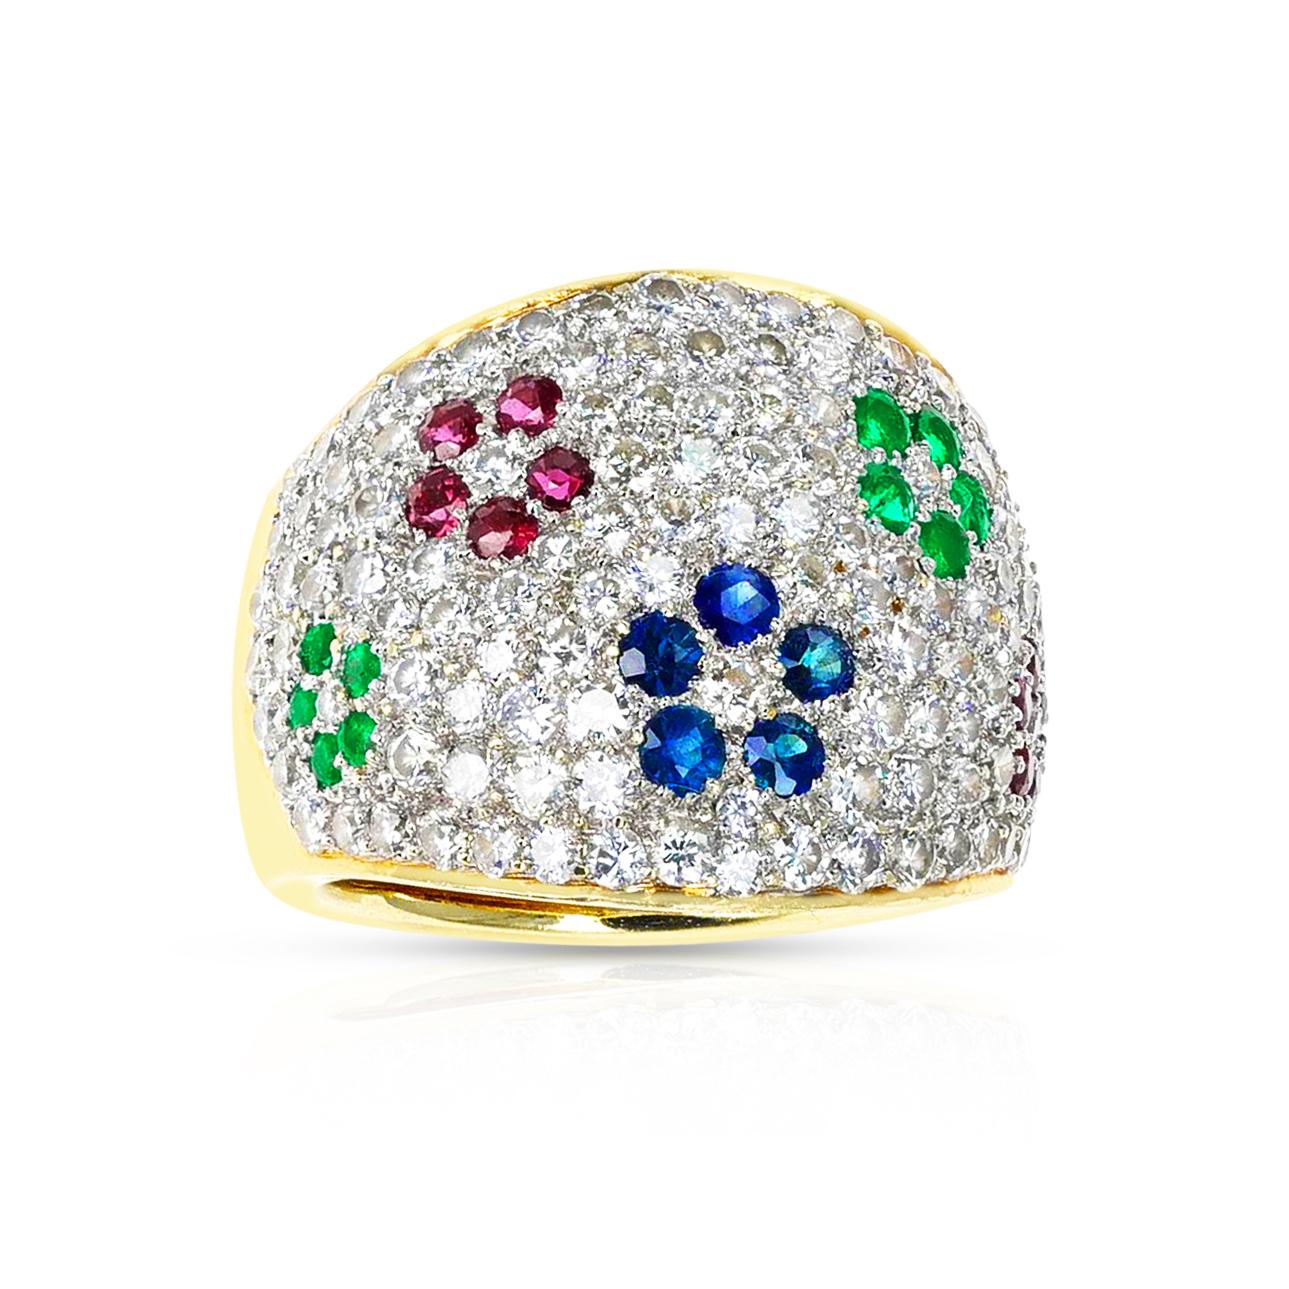 A Diamond, Emerald, Ruby and Sapphire Floral Design Cocktail Ring made in 18 Karat Yellow Gold. The diamonds weigh appx. 2.25 carats. The total weight of the ring is 19.96 grams. The ring size is 5.75 US. Matching earrings available. 